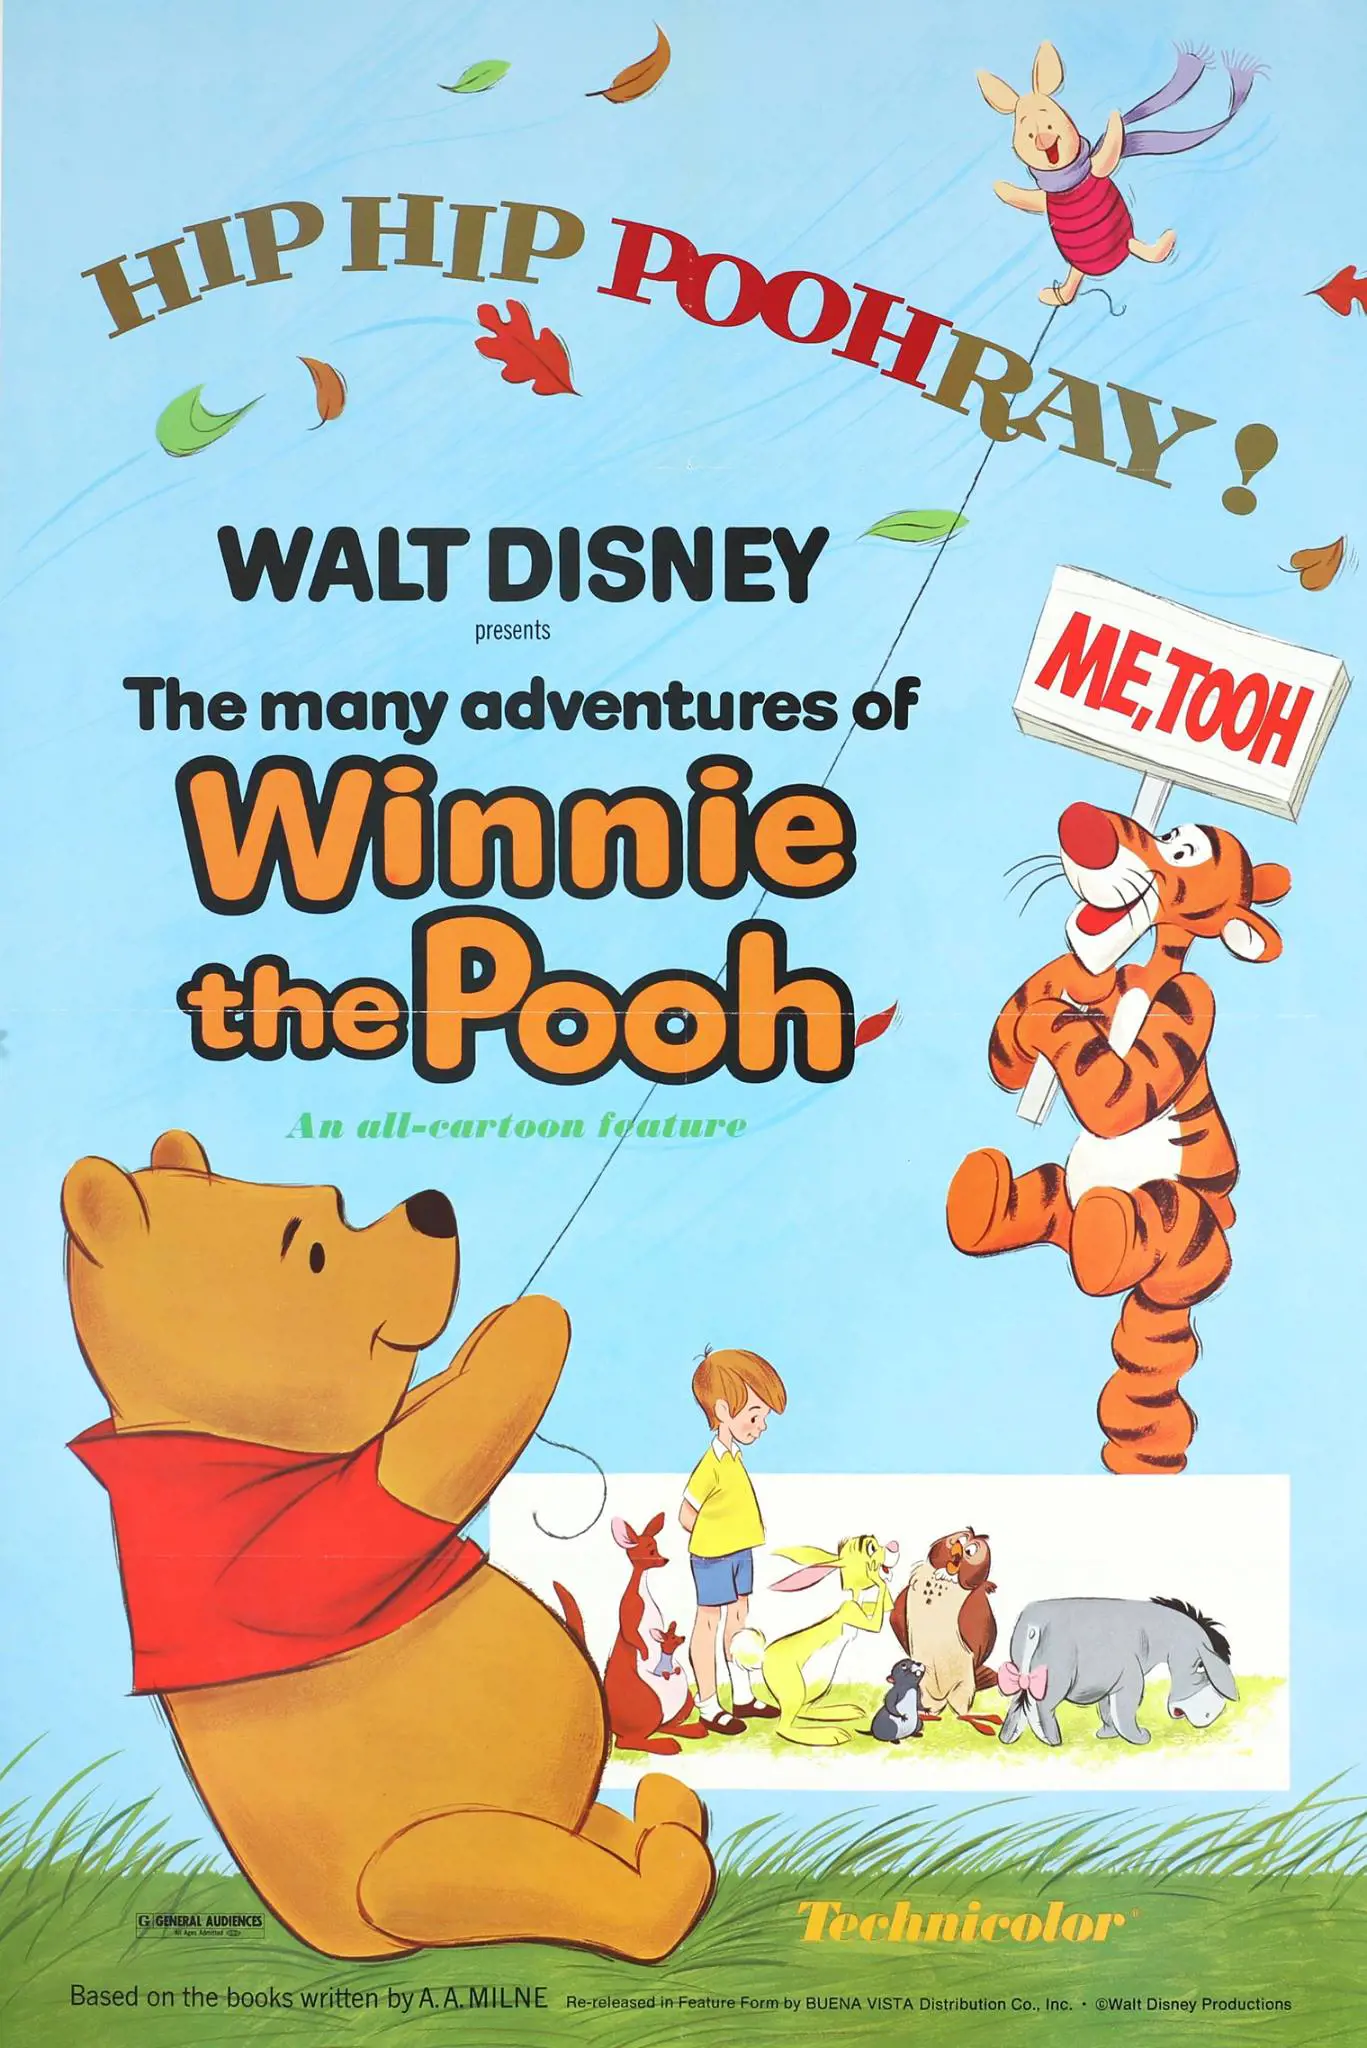 The poster of Winnie the Pooh